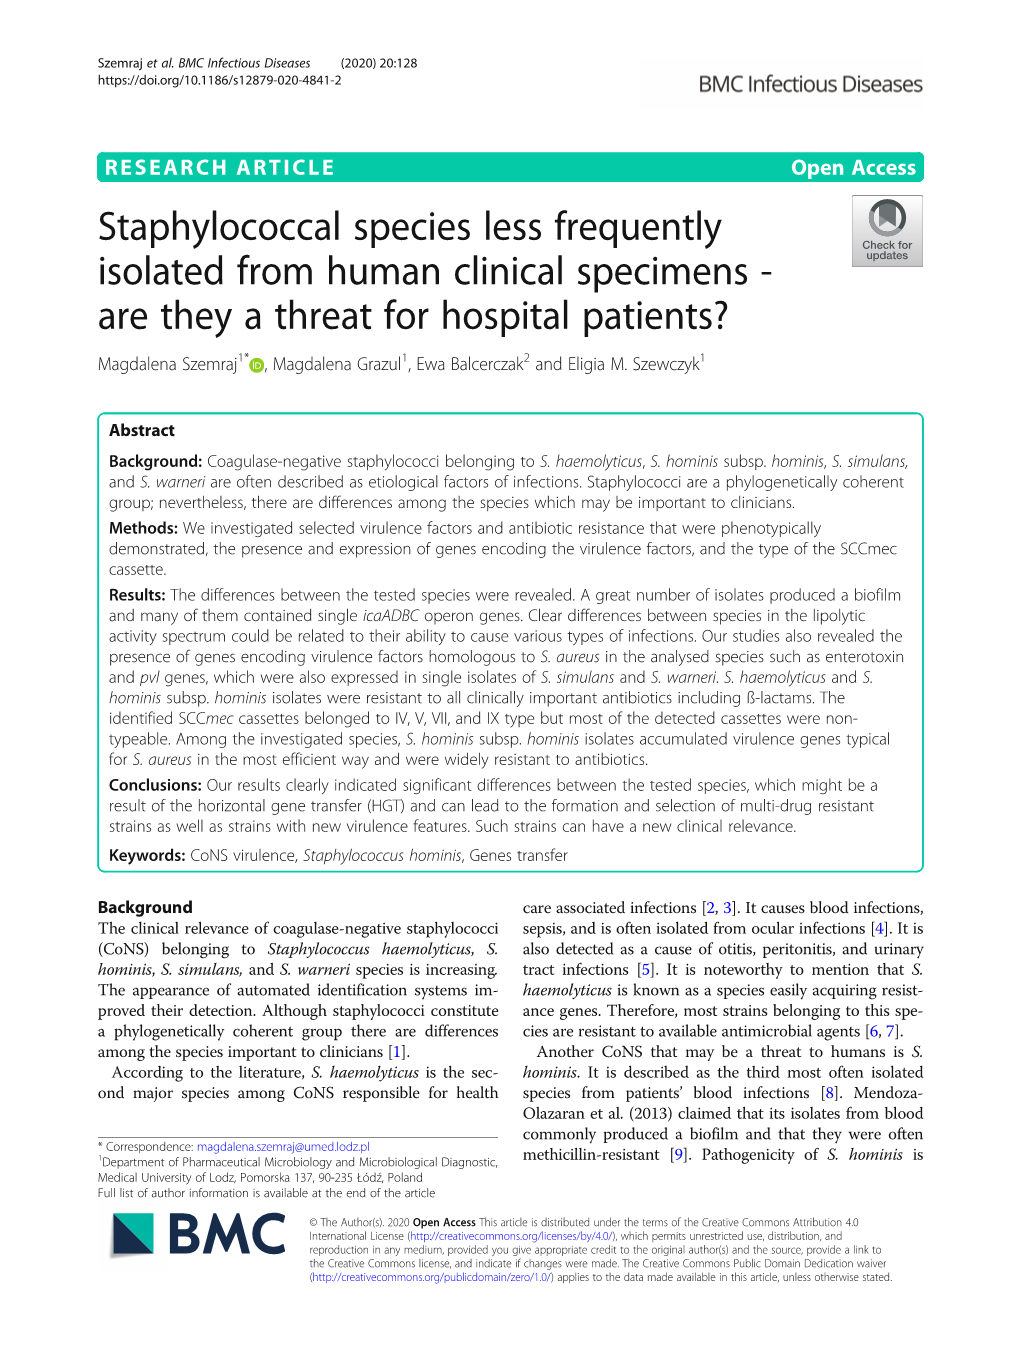 Staphylococcal Species Less Frequently Isolated from Human